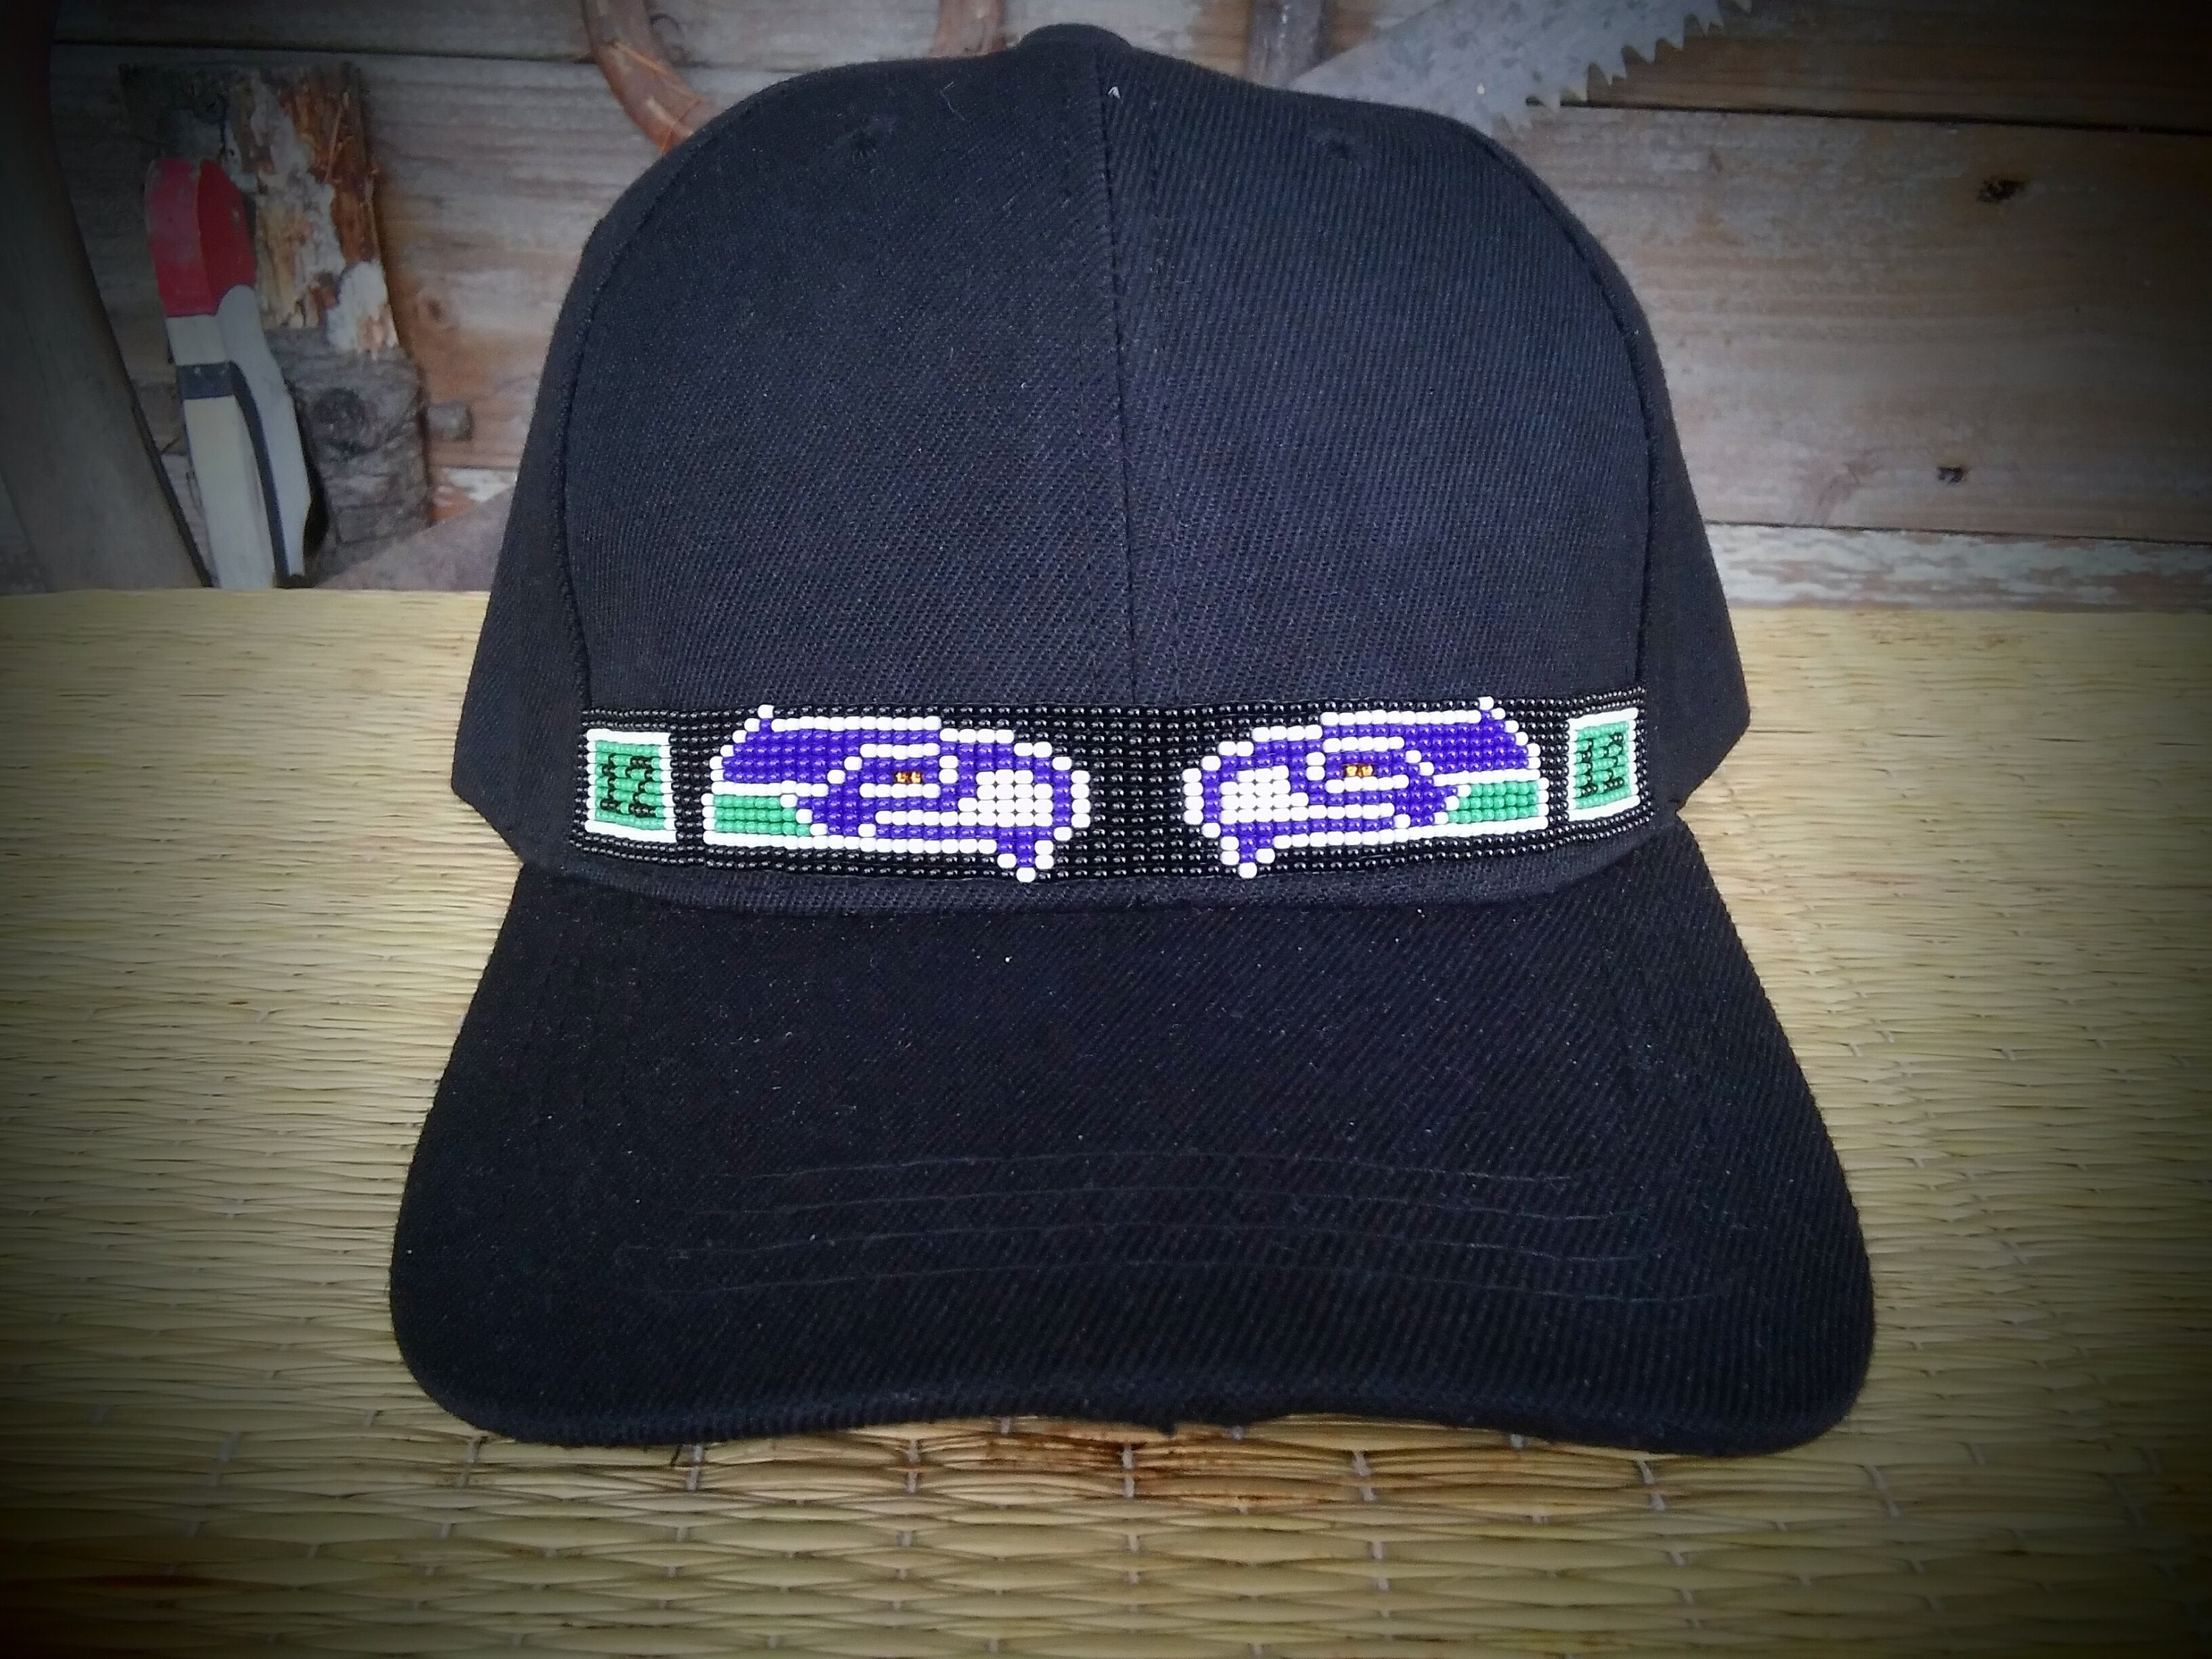 Vintage Hats - Seahawks sline by Ss 3500 Php Meet ups